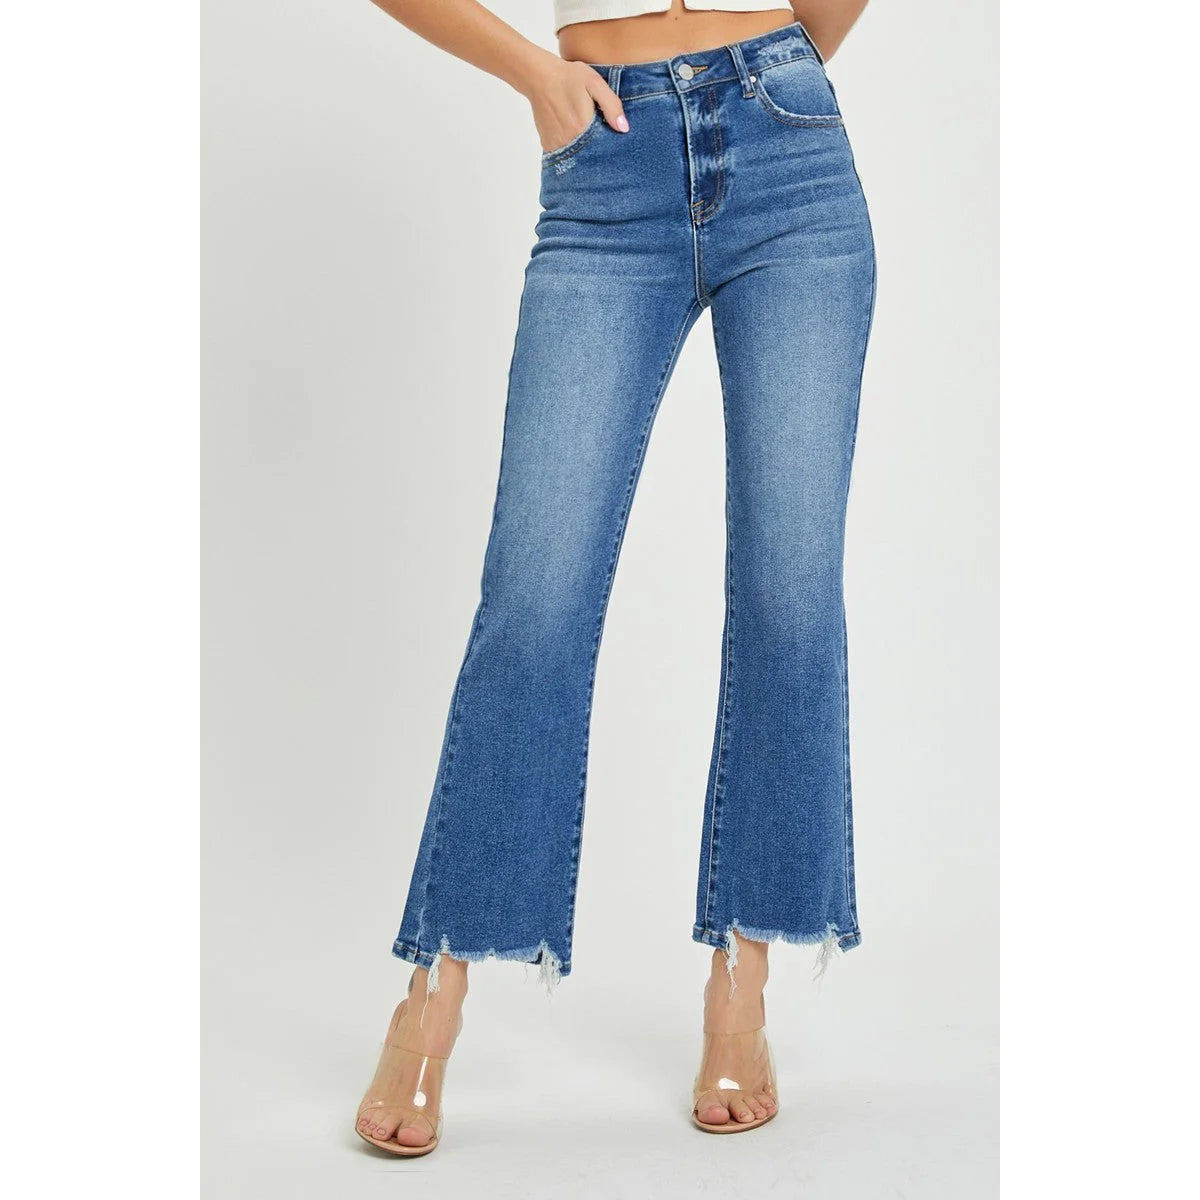 Risen Los Angeles| Dark High Rise Relaxed Fit Jeans